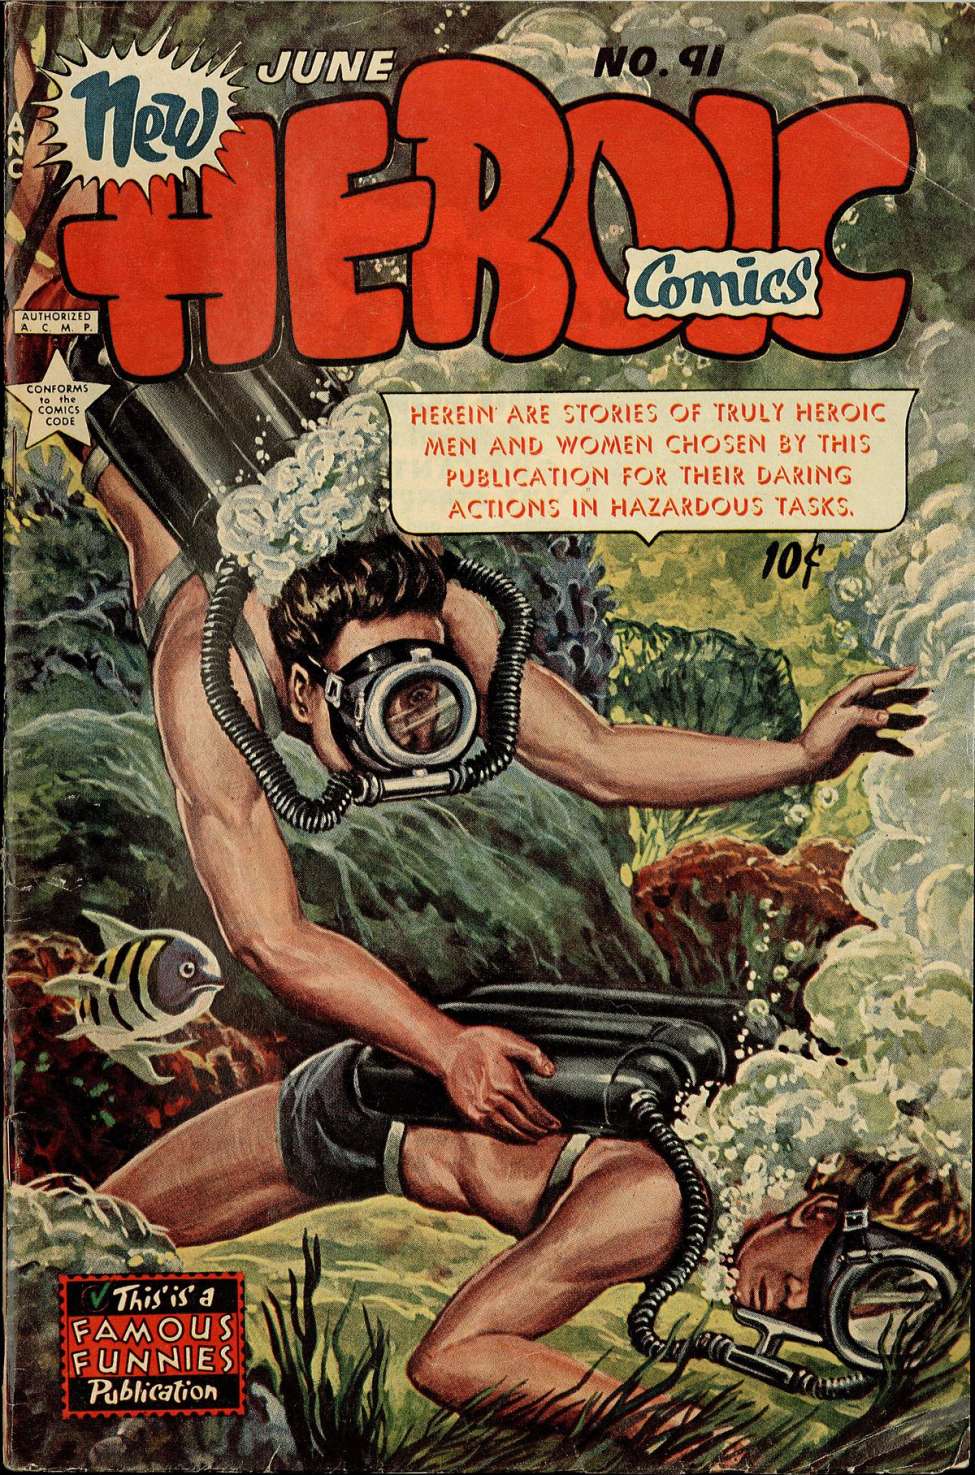 Book Cover For New Heroic Comics 91 - Version 1